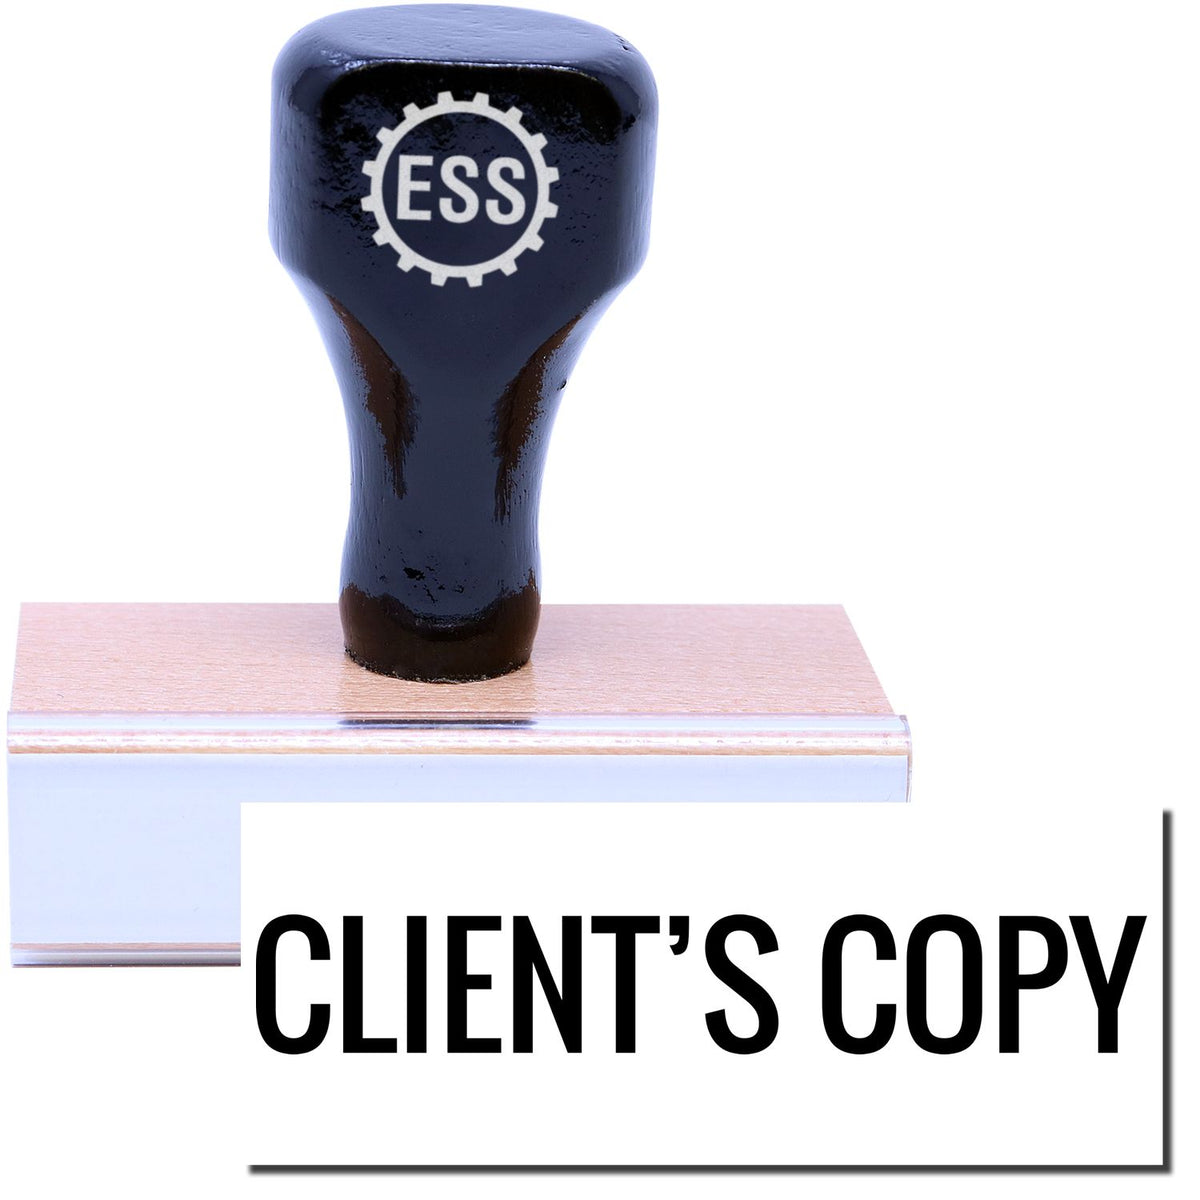 A stock office rubber stamp with a stamped image showing how the text &quot;CLIENT&#39;S COPY&quot; is displayed after stamping.